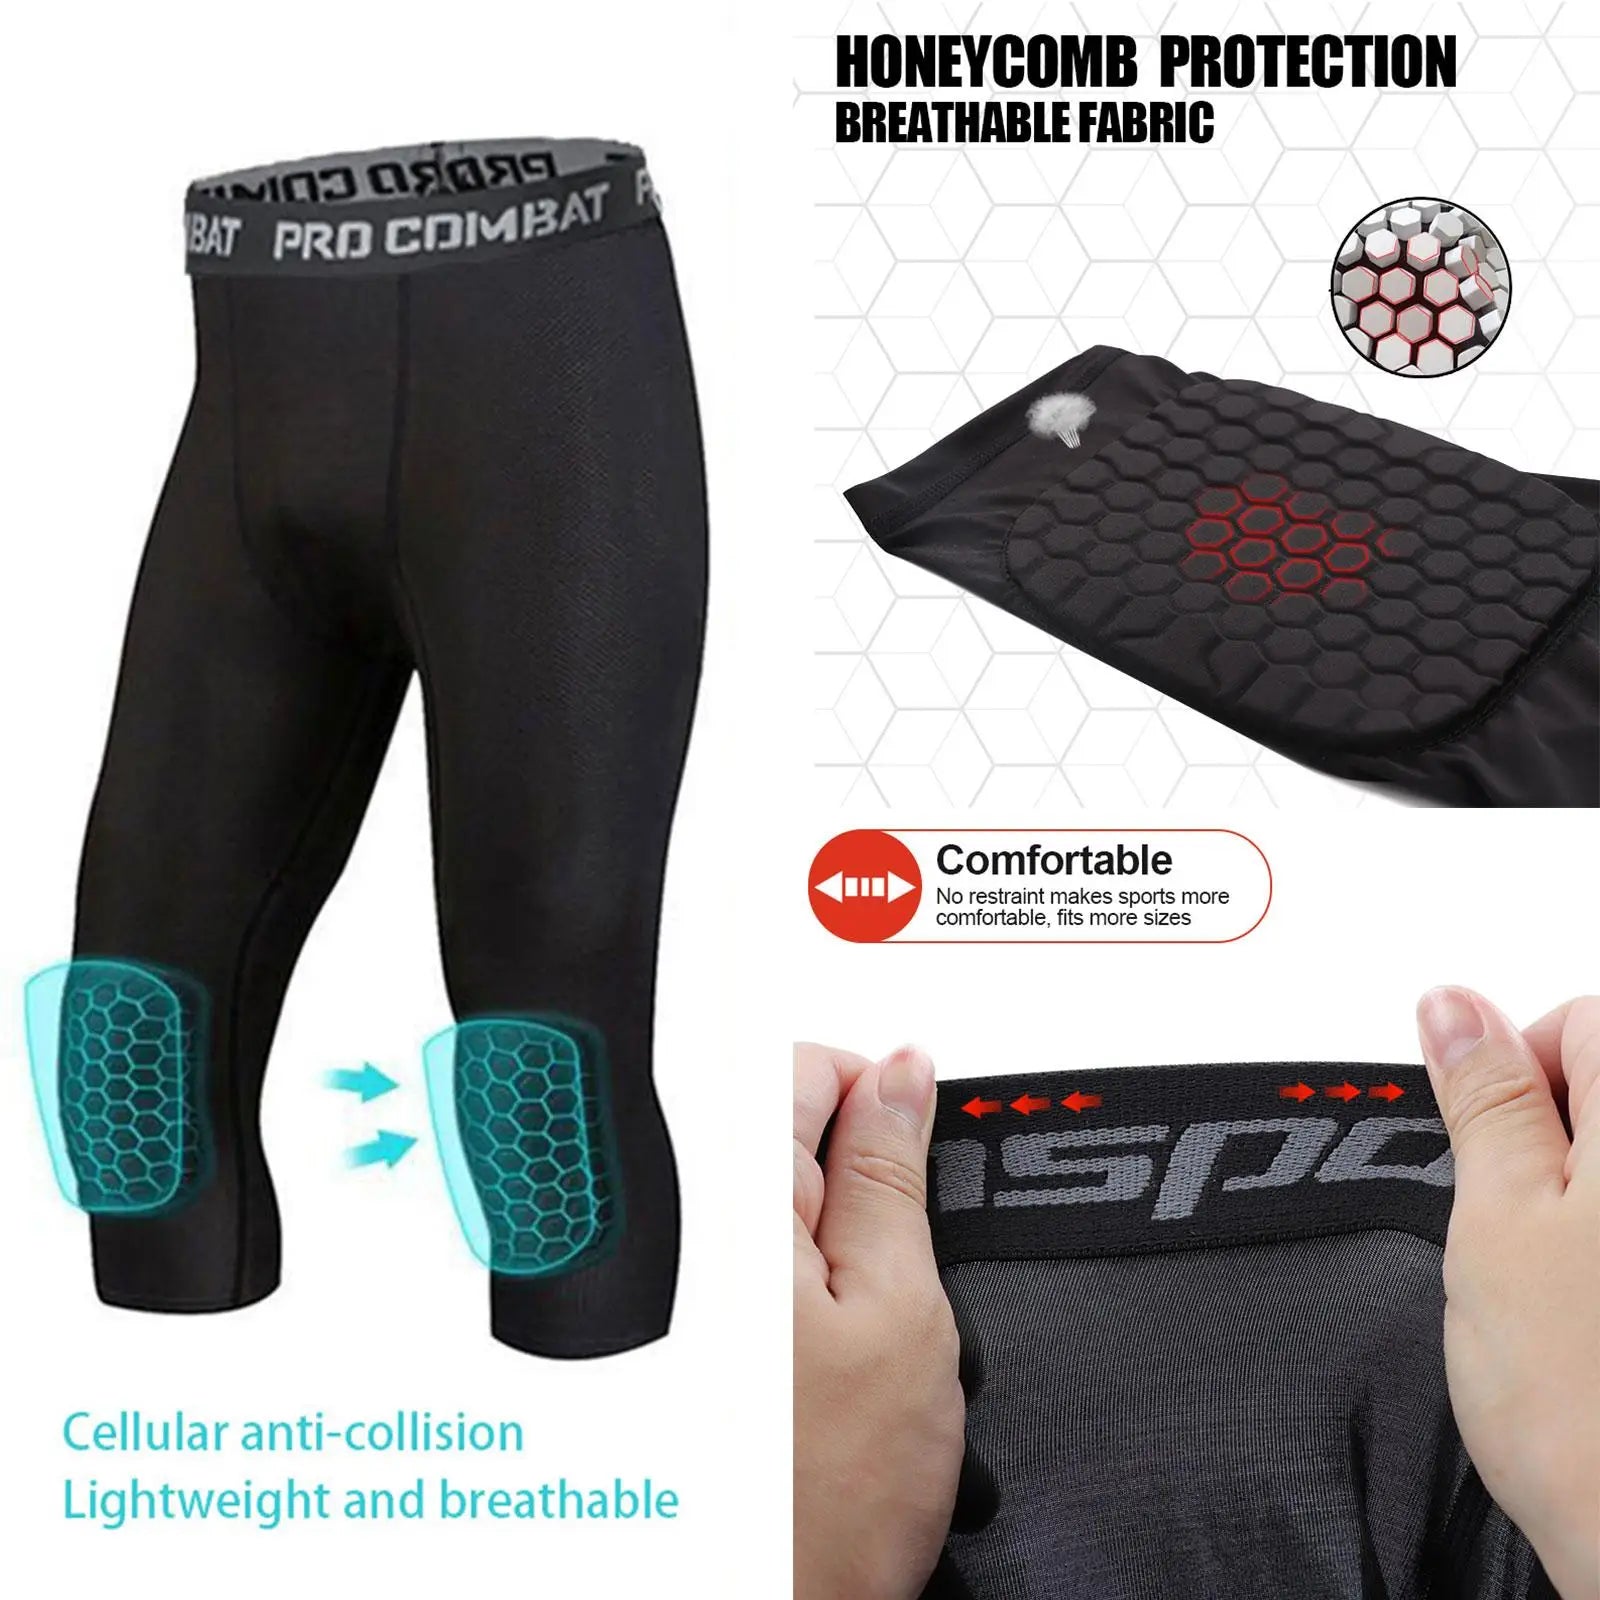 Men Compression Tight Leggings Running Sports Male Workout Bottoms